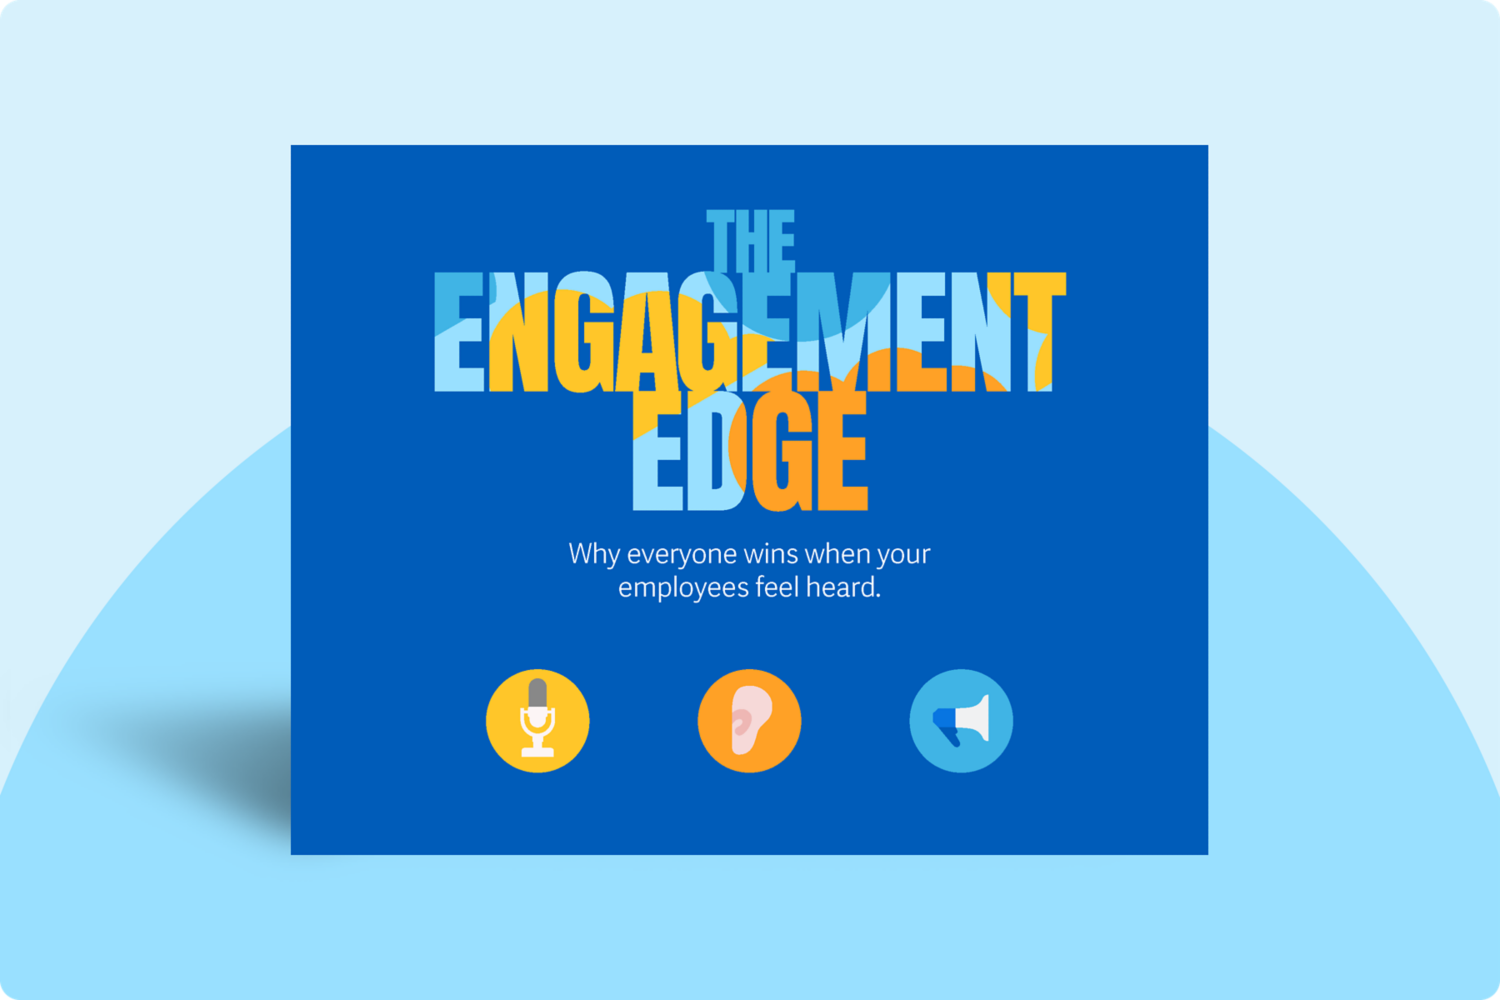 Cover of ebook featuring the title, The Engagement Edge